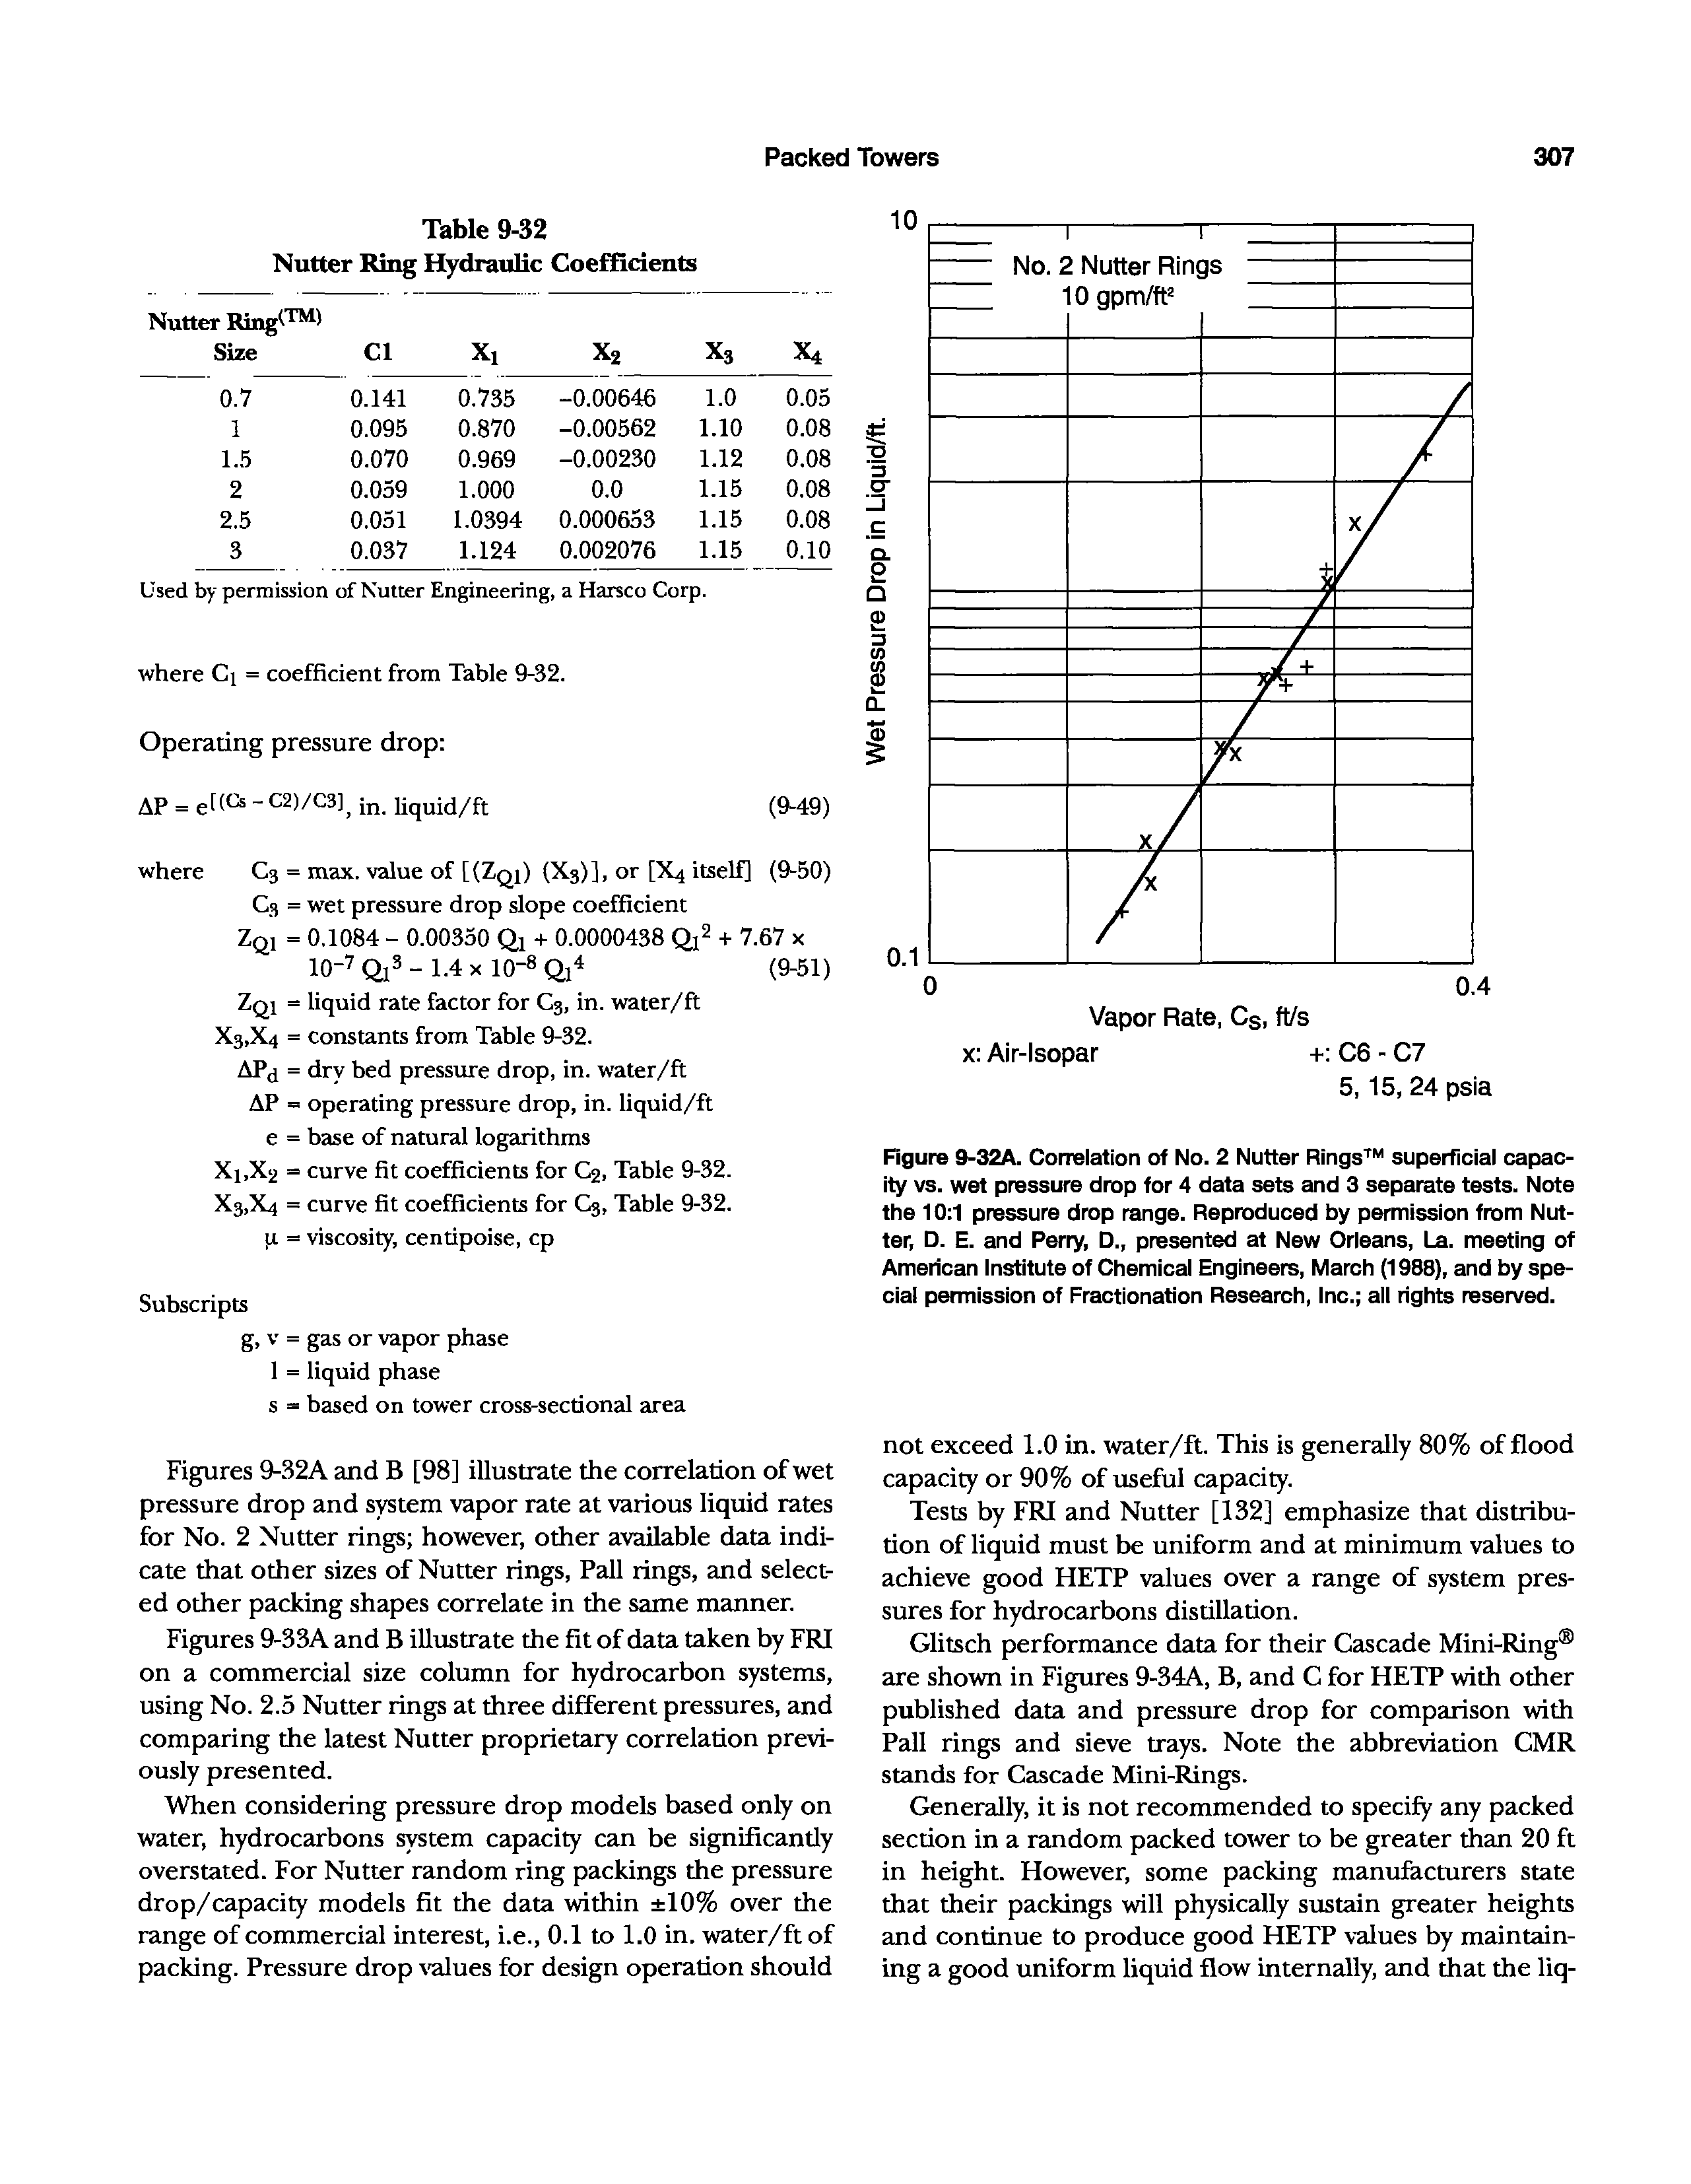 Figures 9-32A and B [98] illustrate the correlation of wet pressure drop and system vapor rate at various liquid rates for No. 2 Nutter rings however, other available data indicate that other sizes of Nutter rings, Pall rings, and selected other packing shapes correlate in the same manner.